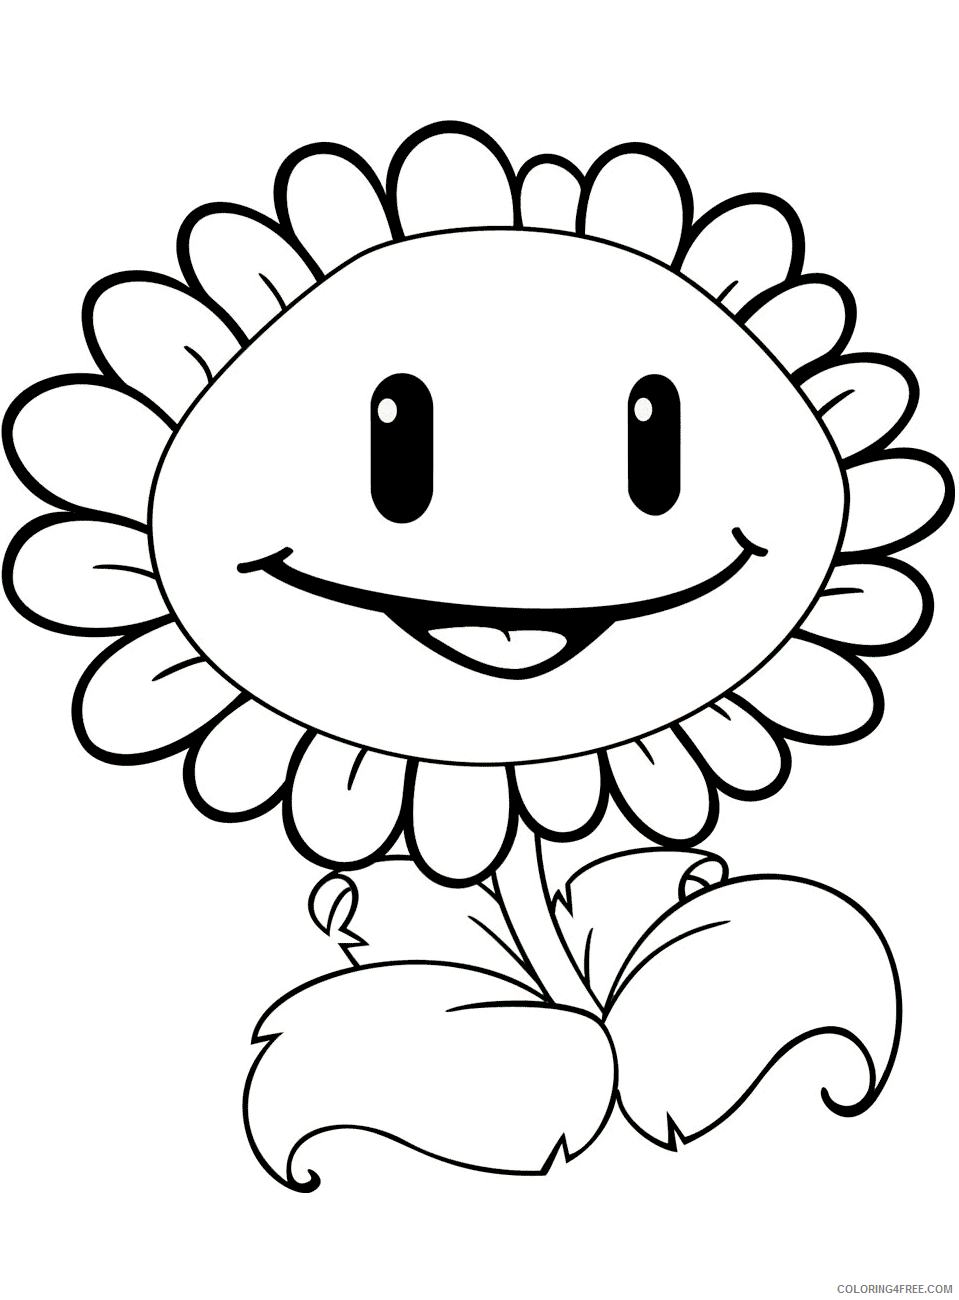 Plants vs Zombies Coloring Pages Games sunflower Printable 2021 0811 Coloring4free